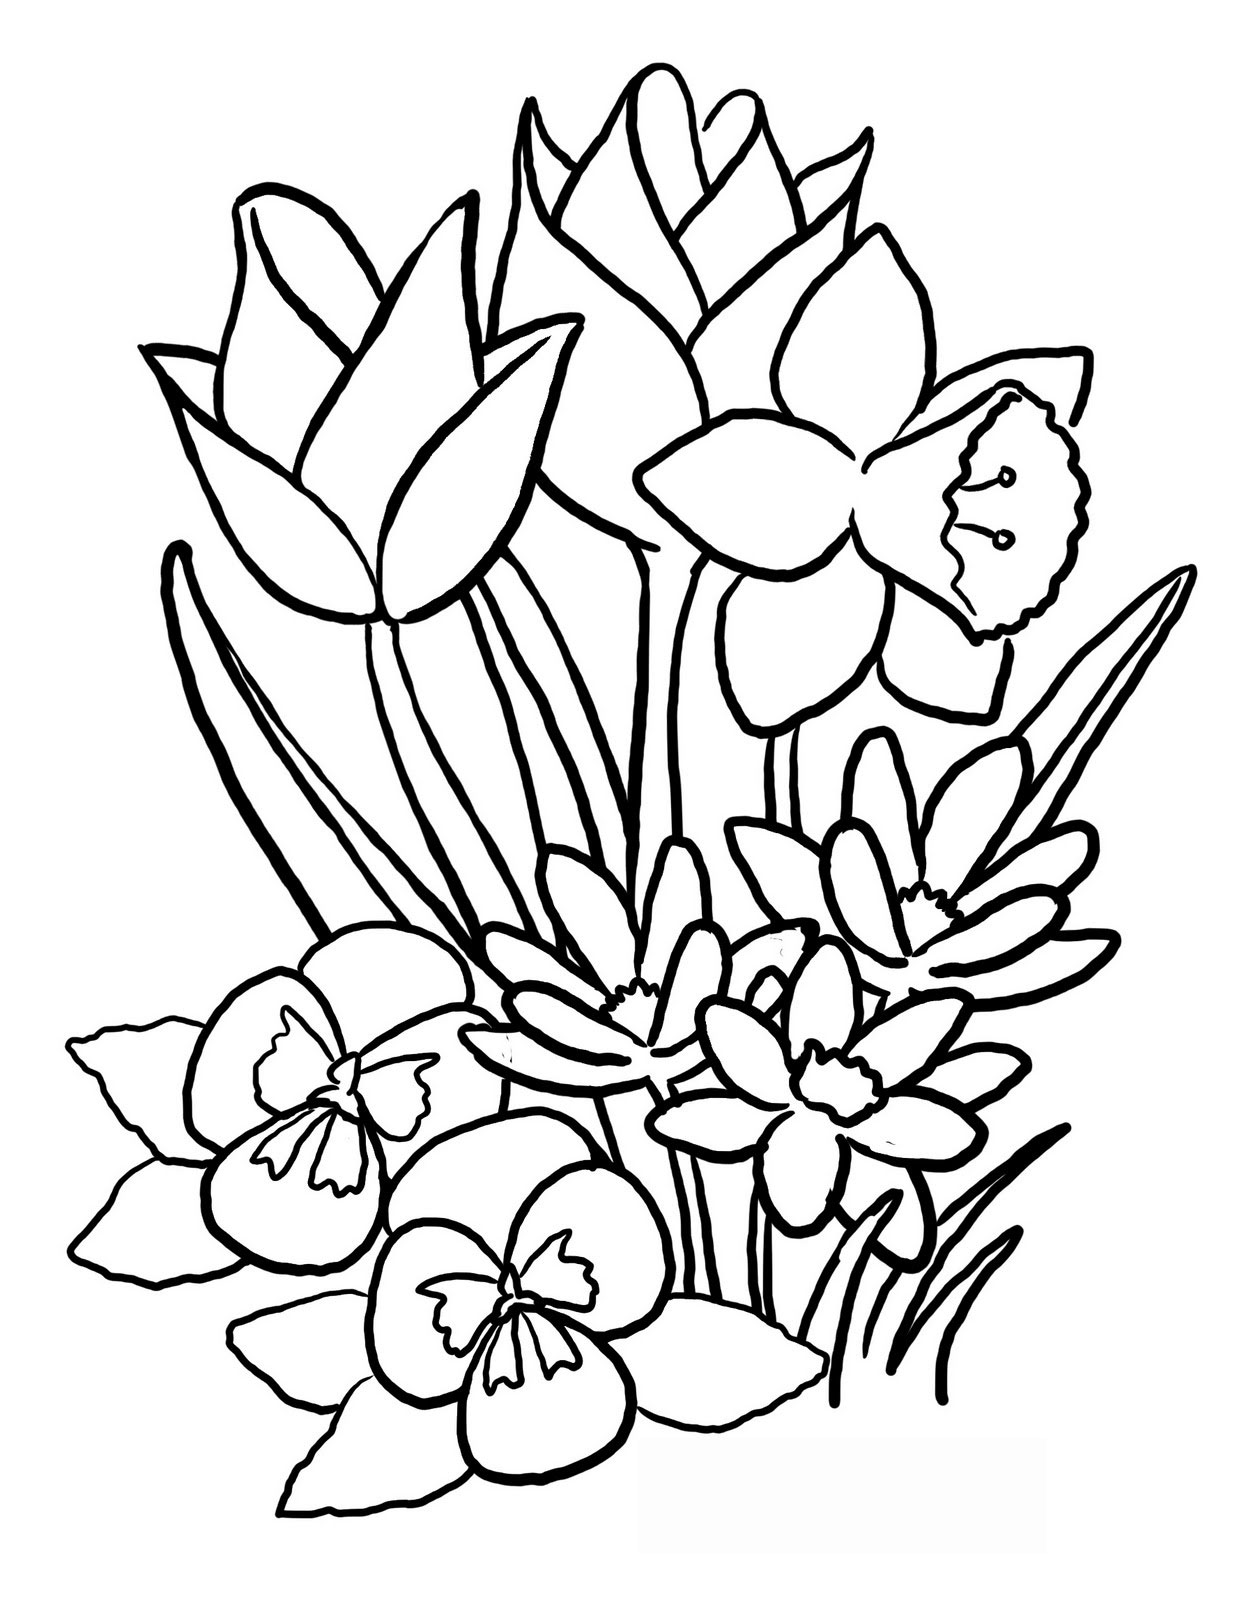 Spring Drawing - ClipArt Best